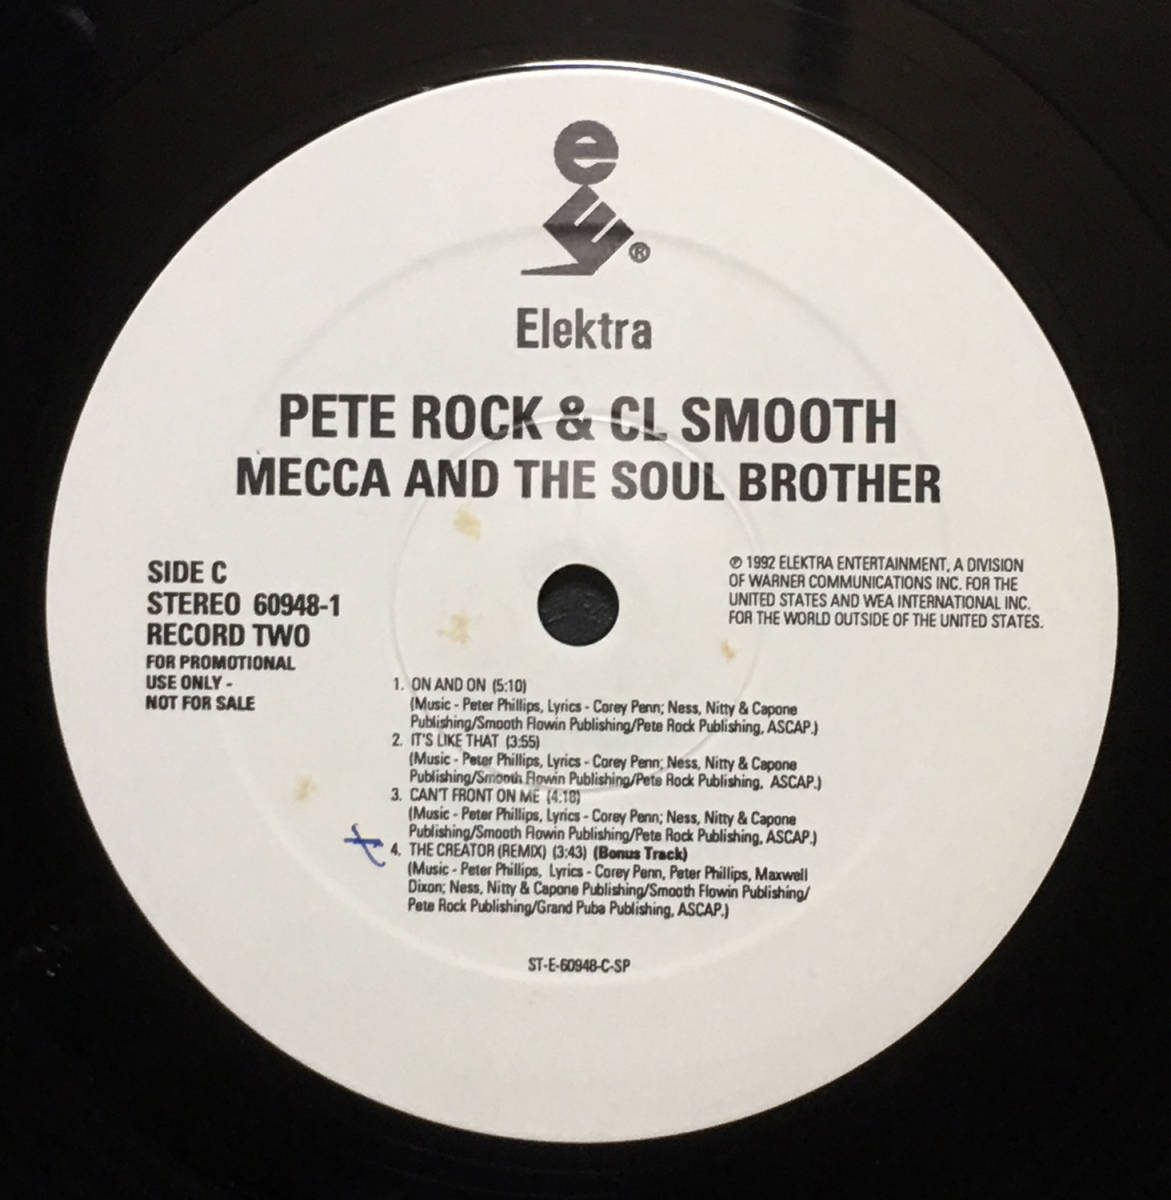 [US original / beautiful goods / promo record ]PETE ROCK & C.L.SMOOTH[MECCA AND THE SOUL BROTHER] white label pi-to lock C.L. smooth name record 2LP